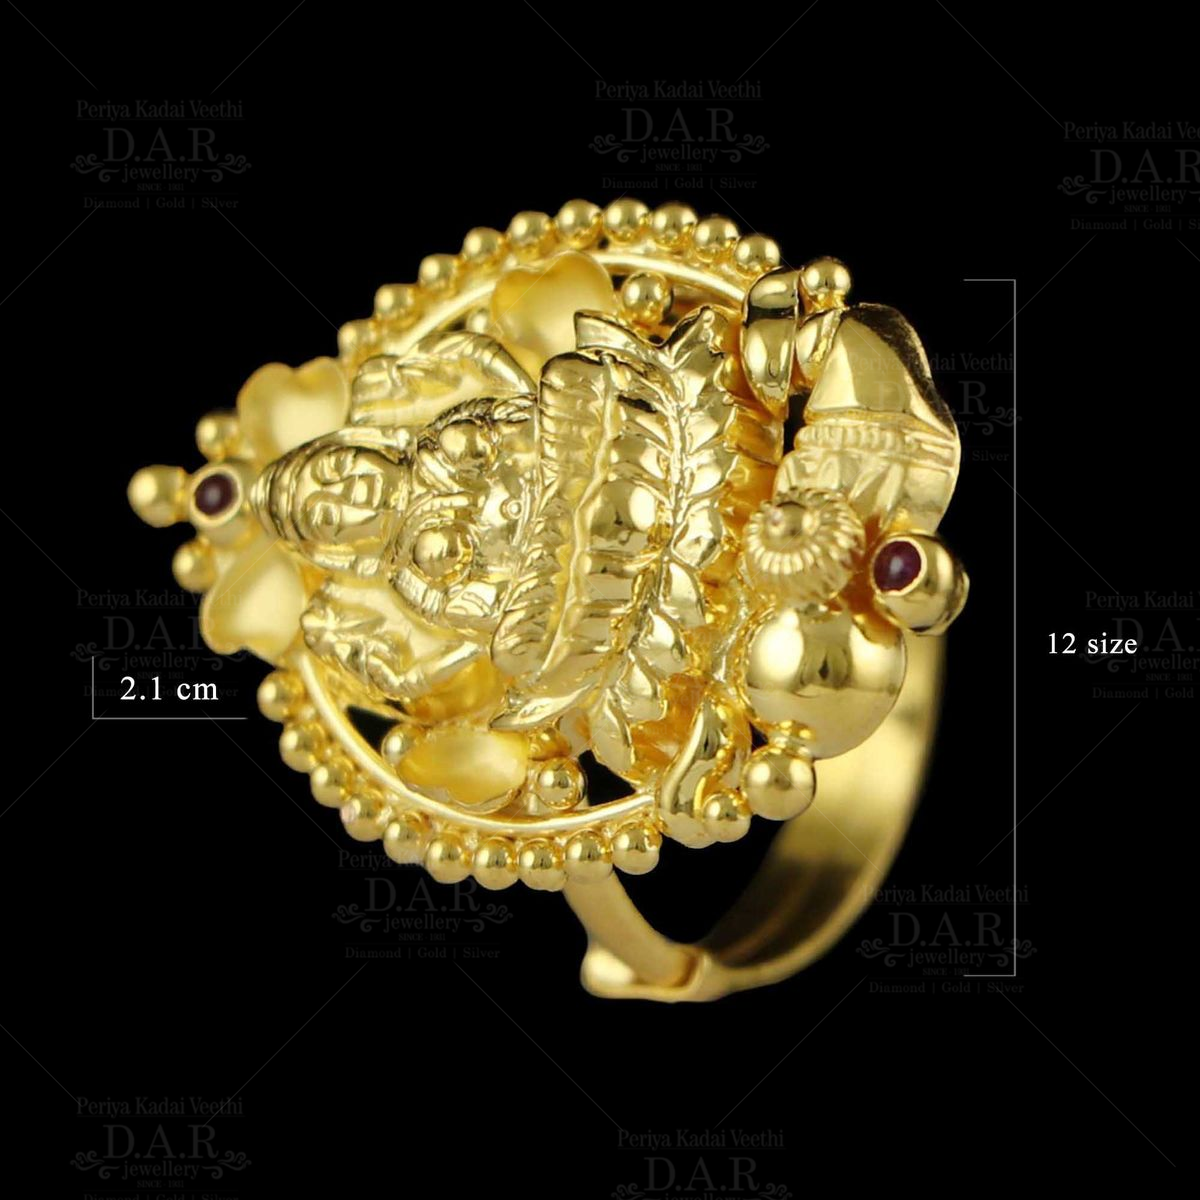 sravana masam special gold laxmi devi rings models//with weight - YouTube